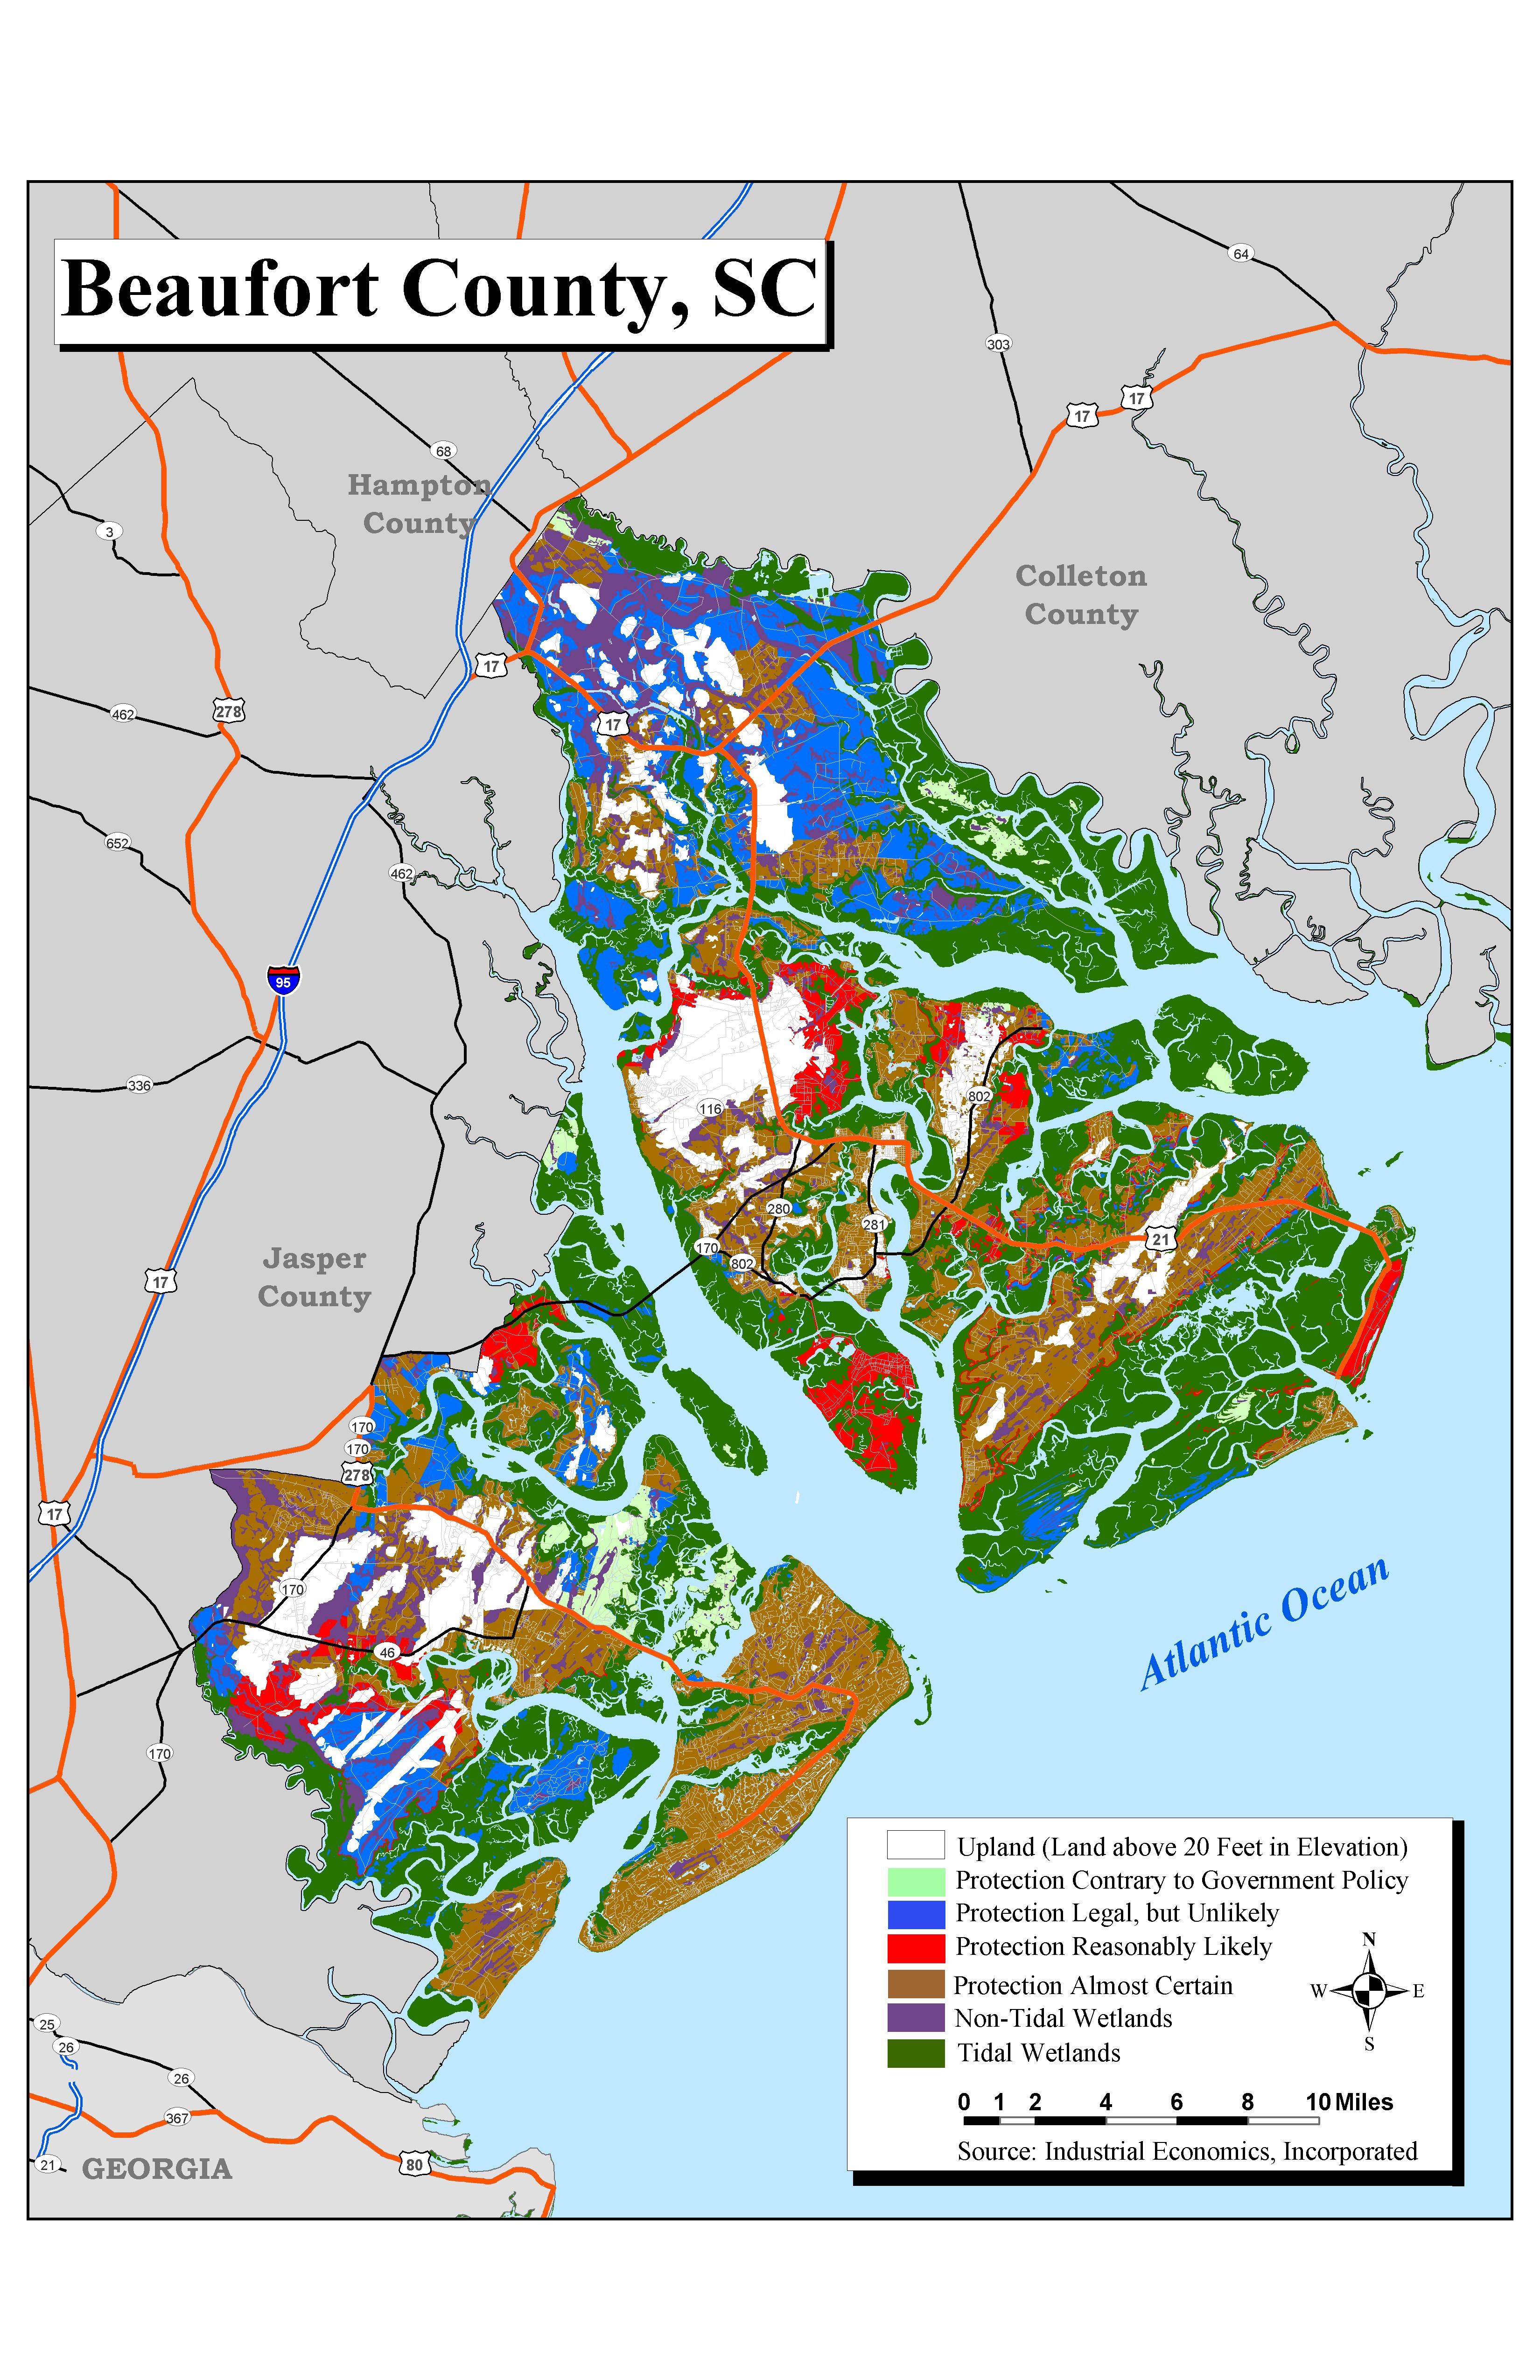 Sea Level Rise Planning Maps Likelihood Of Shore Protection In